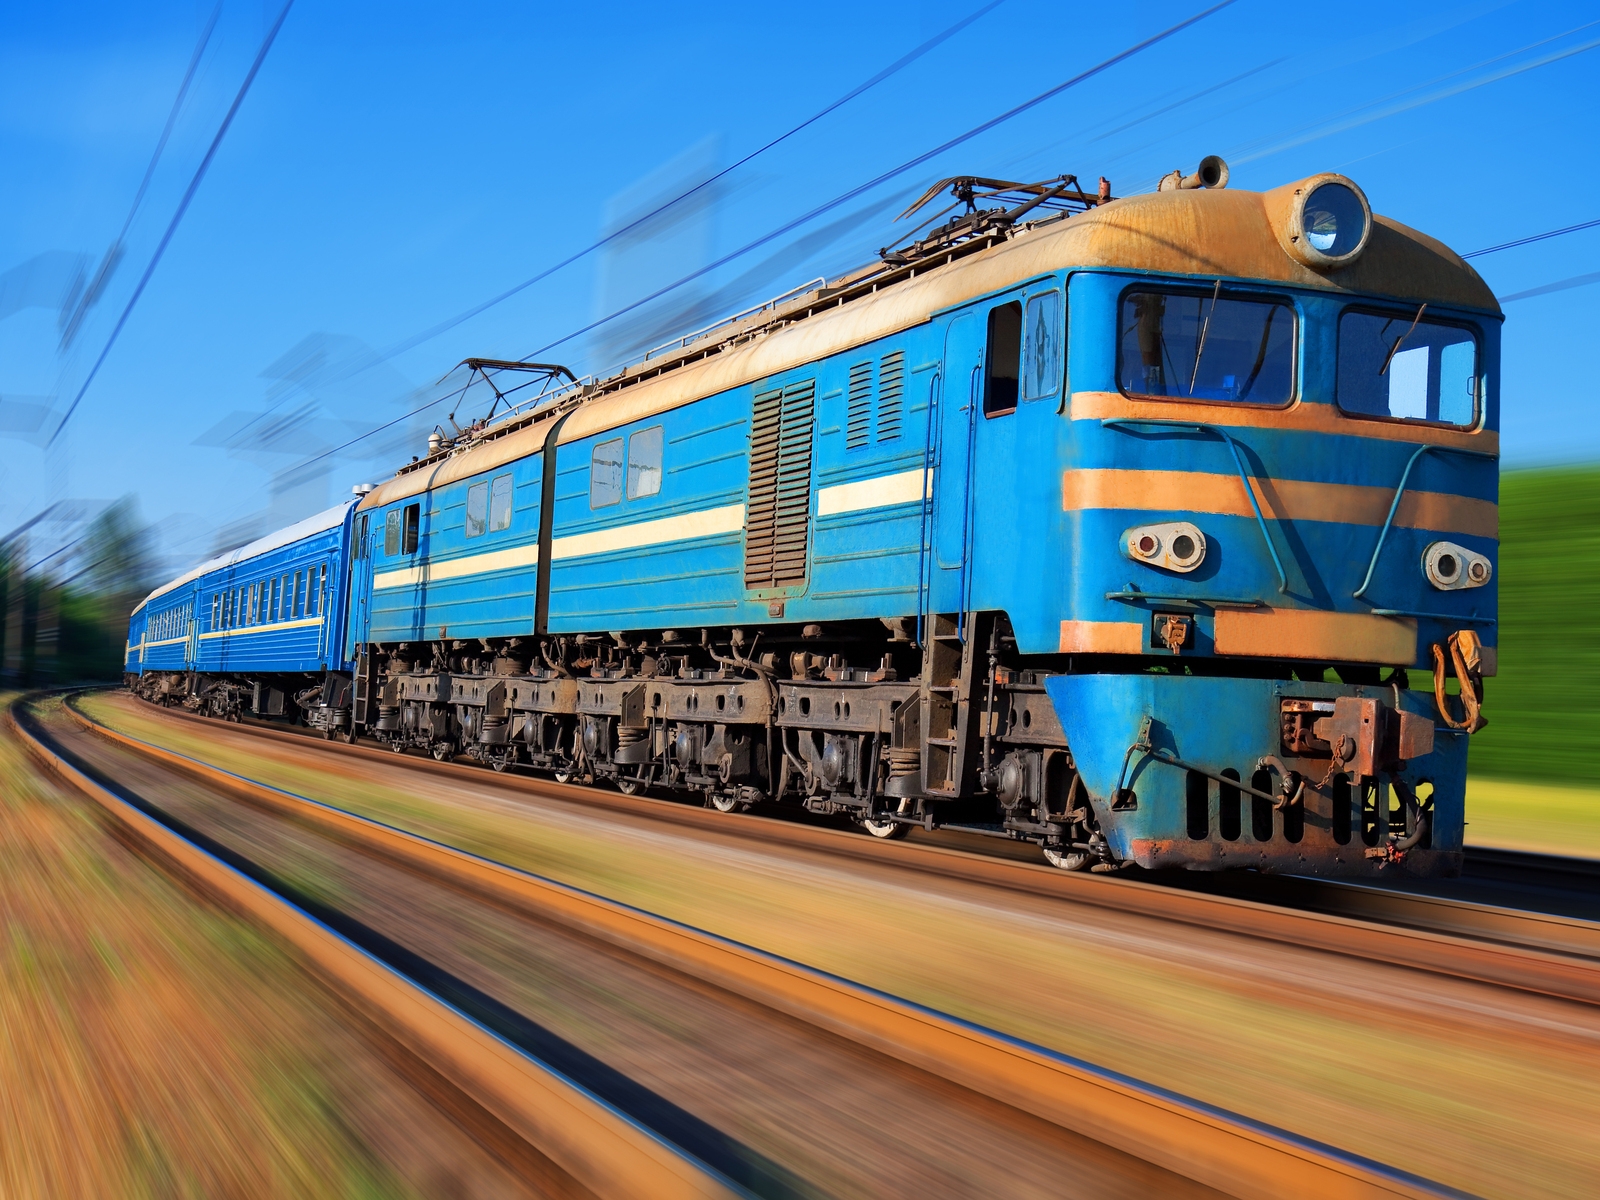 Old Blue Train for 1600 x 1200 resolution